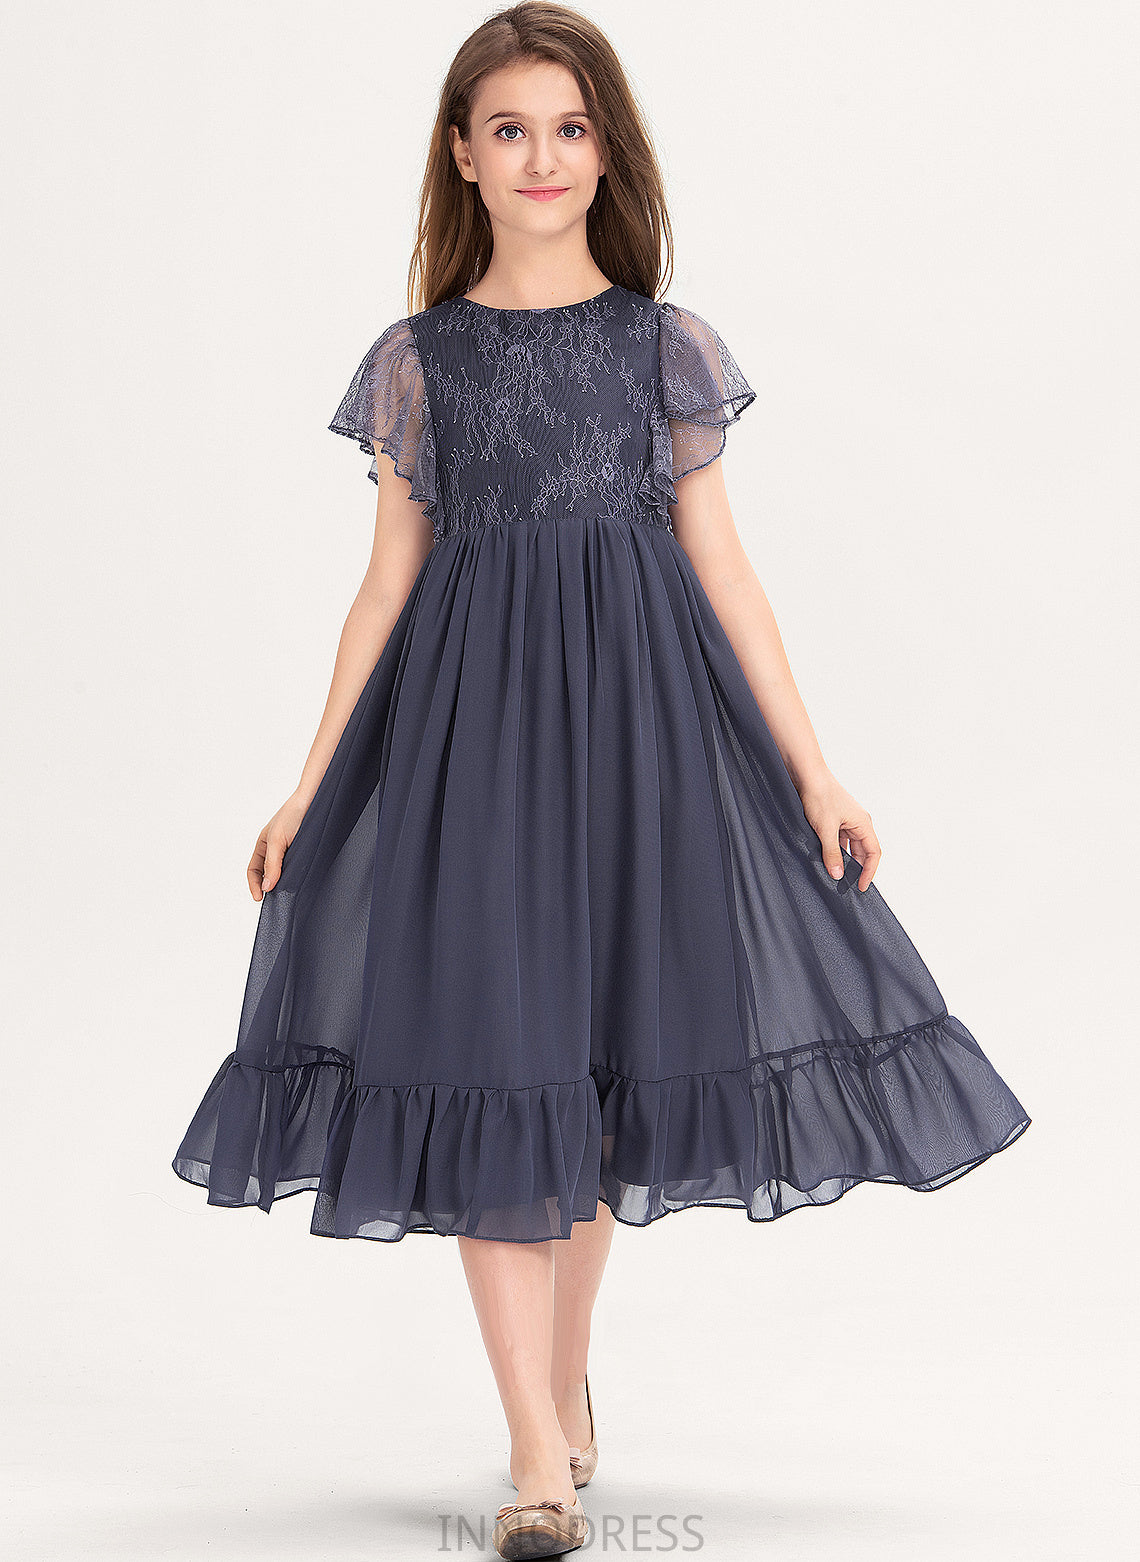 Lace Junior Bridesmaid Dresses With Scoop Cascading Denise Neck Knee-Length A-Line Ruffles Chiffon